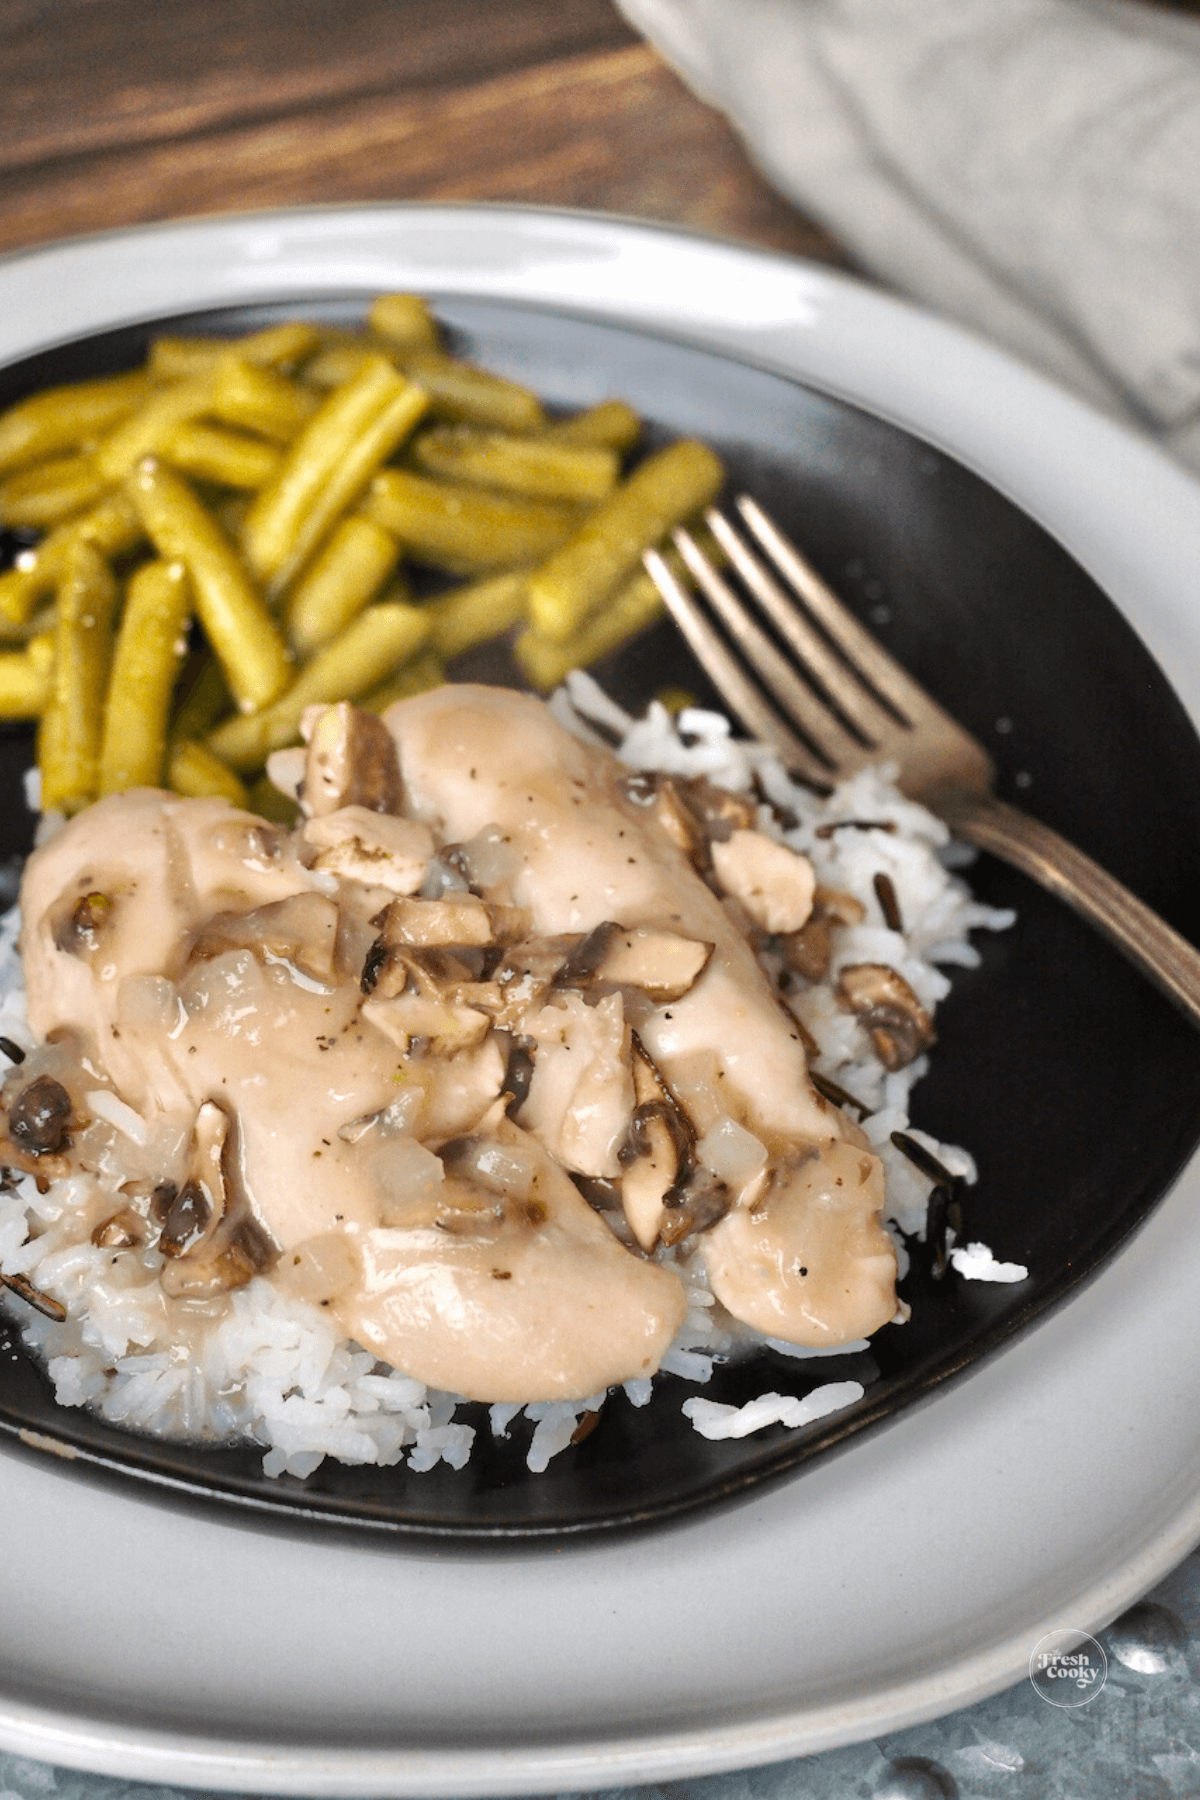 Best Cracker Barrel Chicken and Rice recipe on black plate with green beans and a pretty fork on the side.